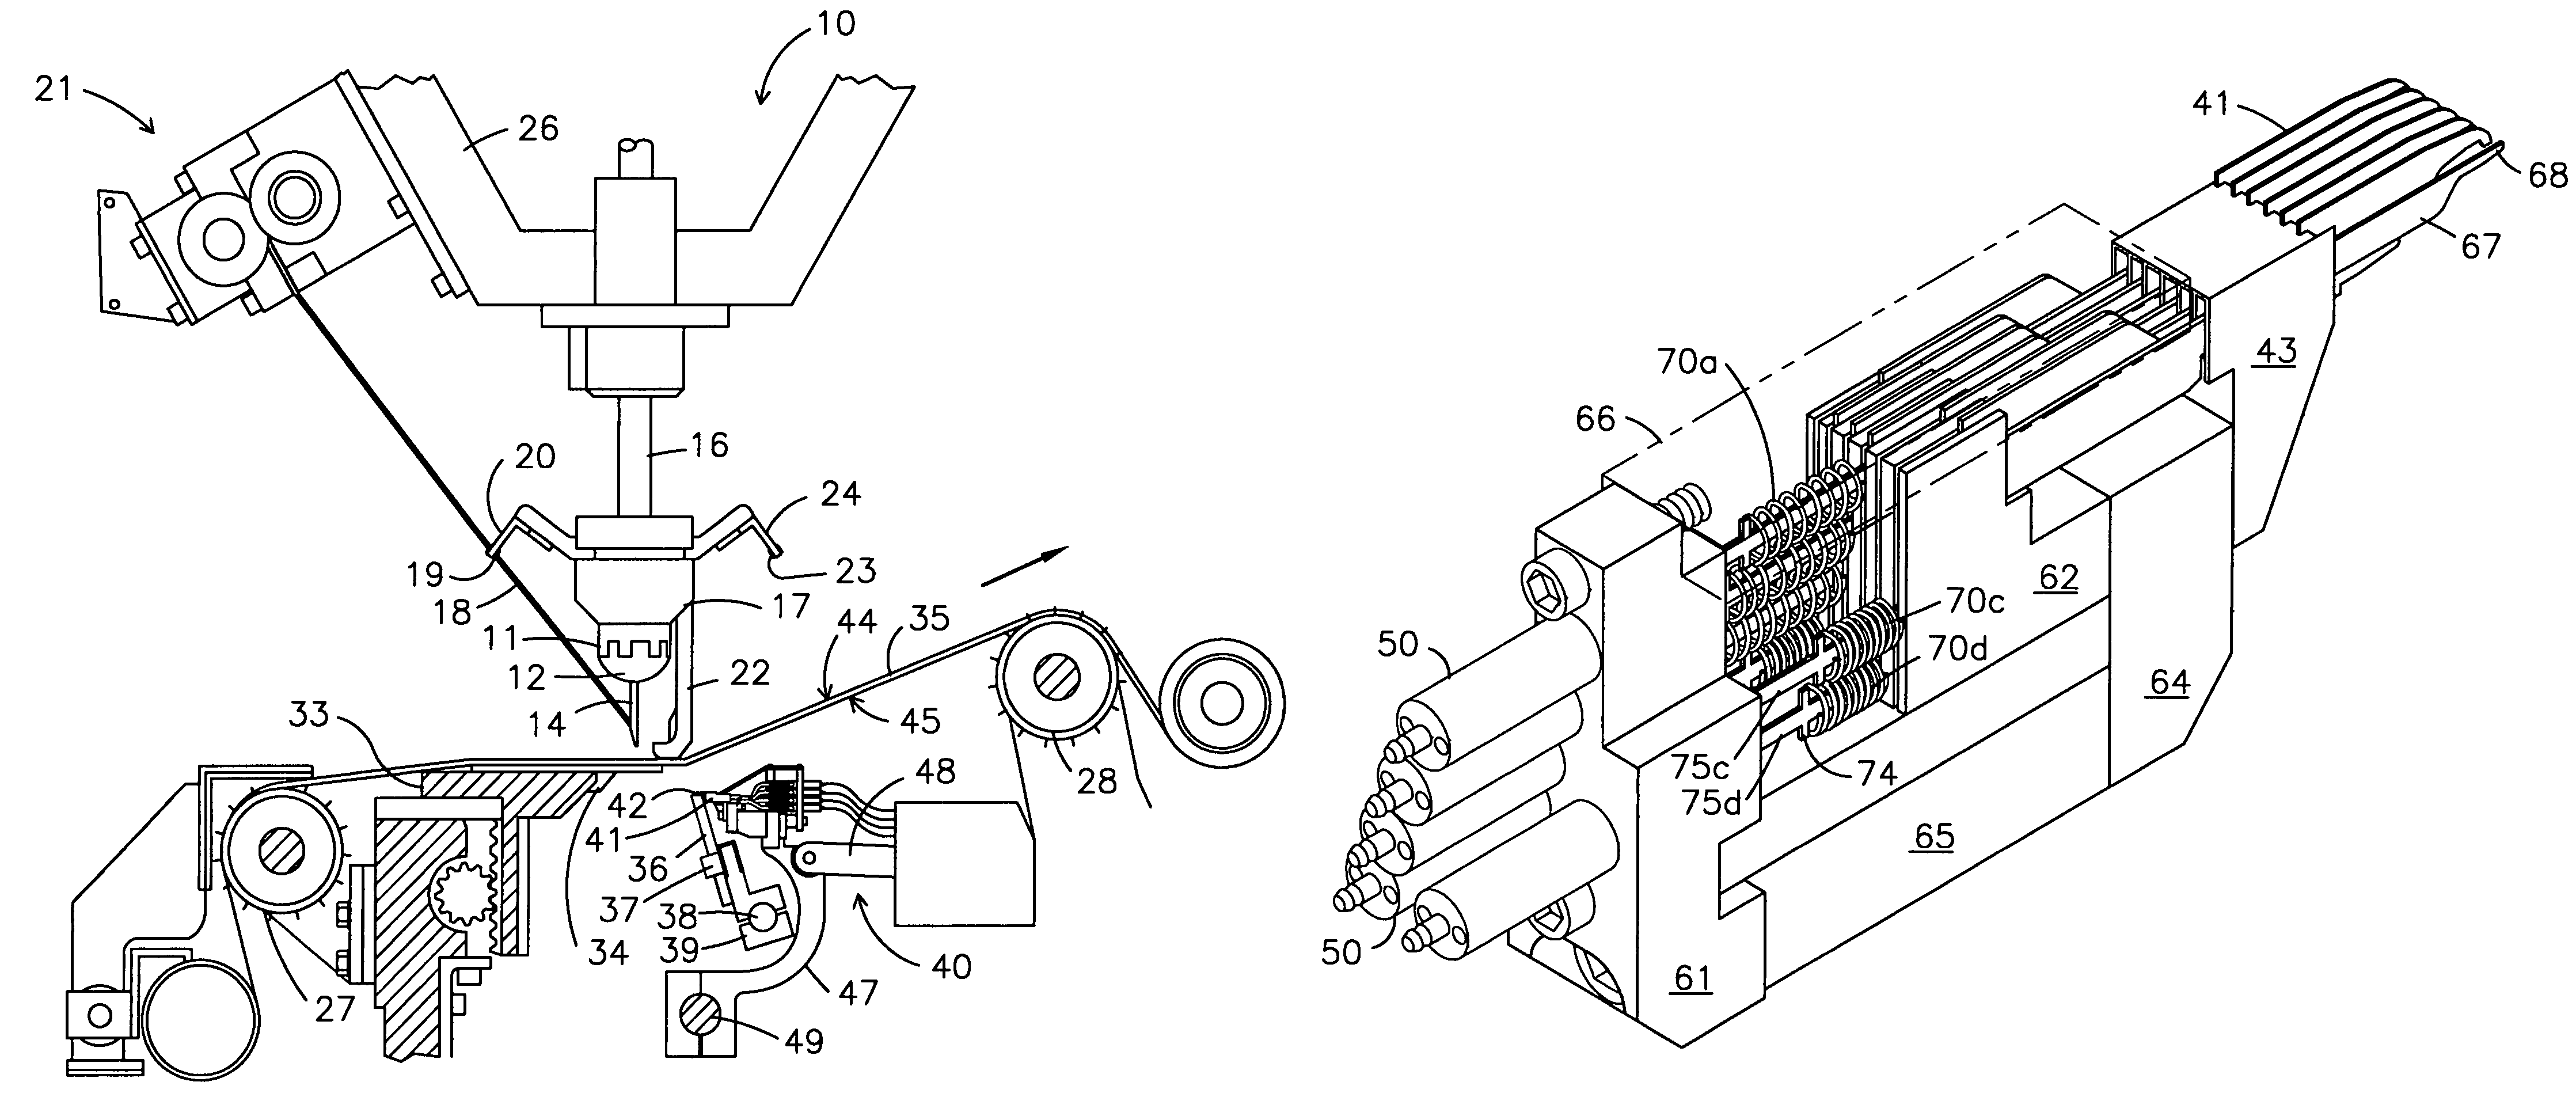 Gate apparatus for tufting loop and cut pile stitches